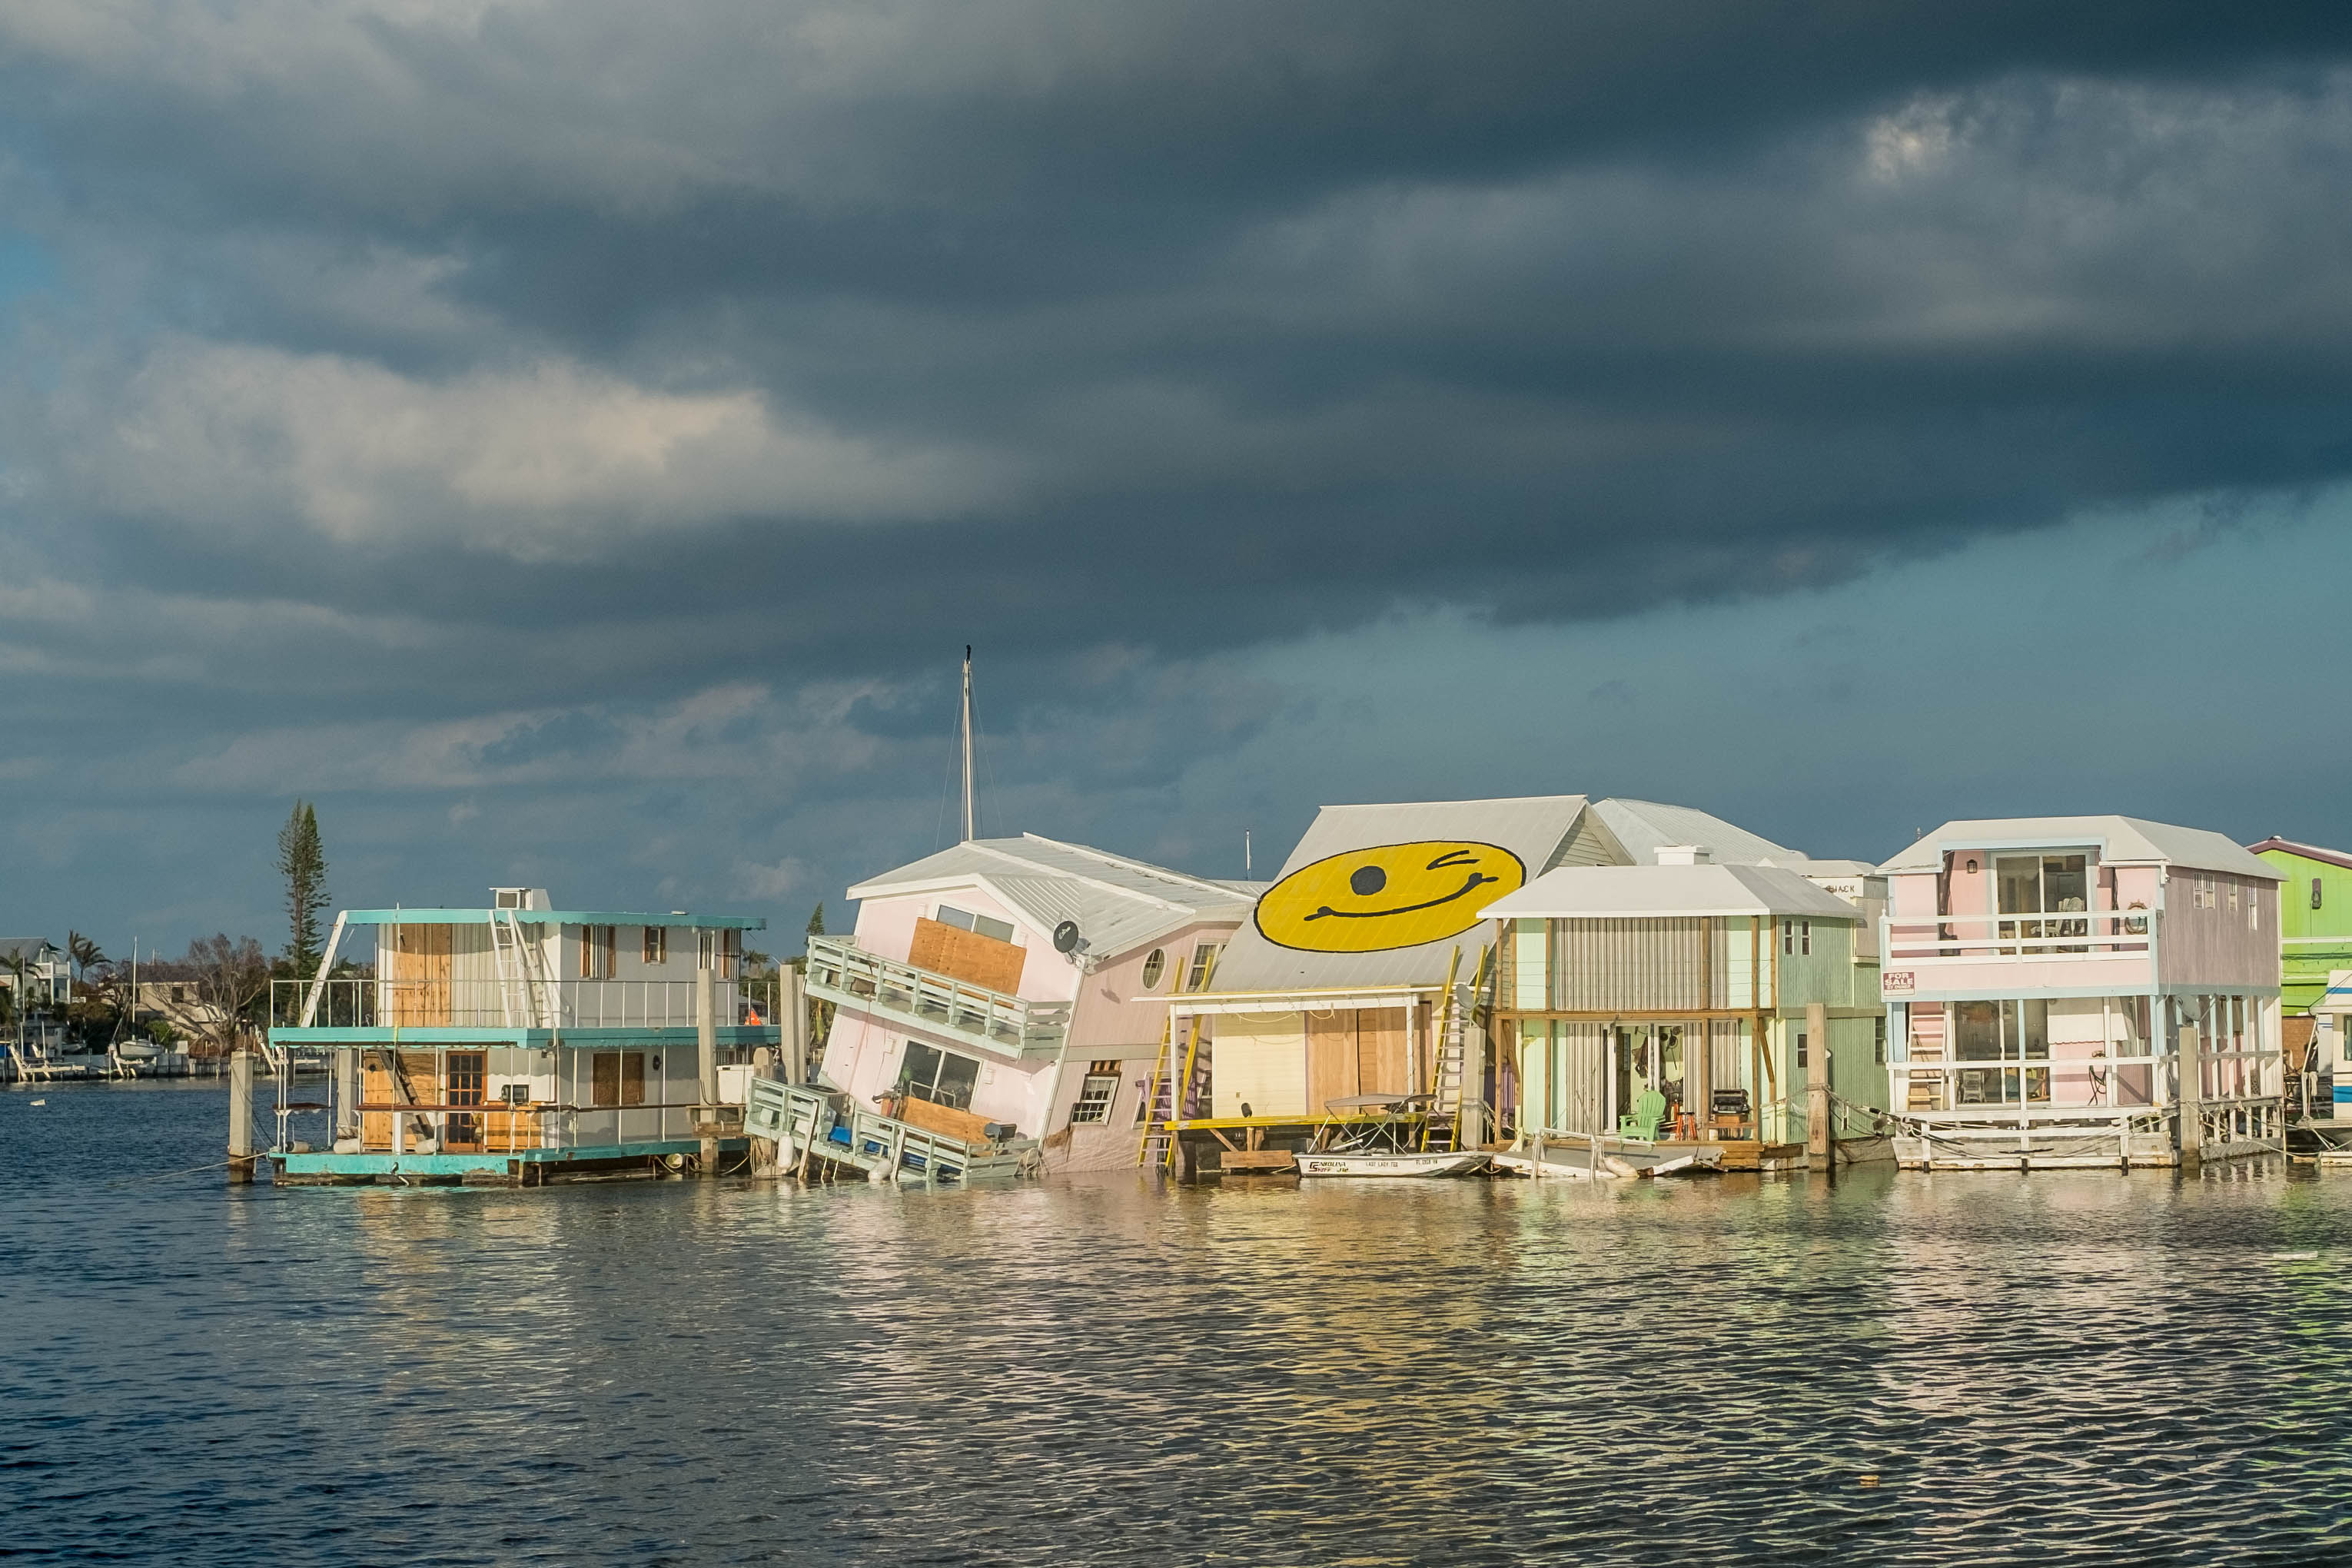 Mark Hedden and Nancy Klingener will create a multimedia work about Hurricane Irma - starting with the experience of riding the storm out in The Studios itself, and moving on to the immediate aftermath and its effects on those who stayed in Key West and the Lower Keys.